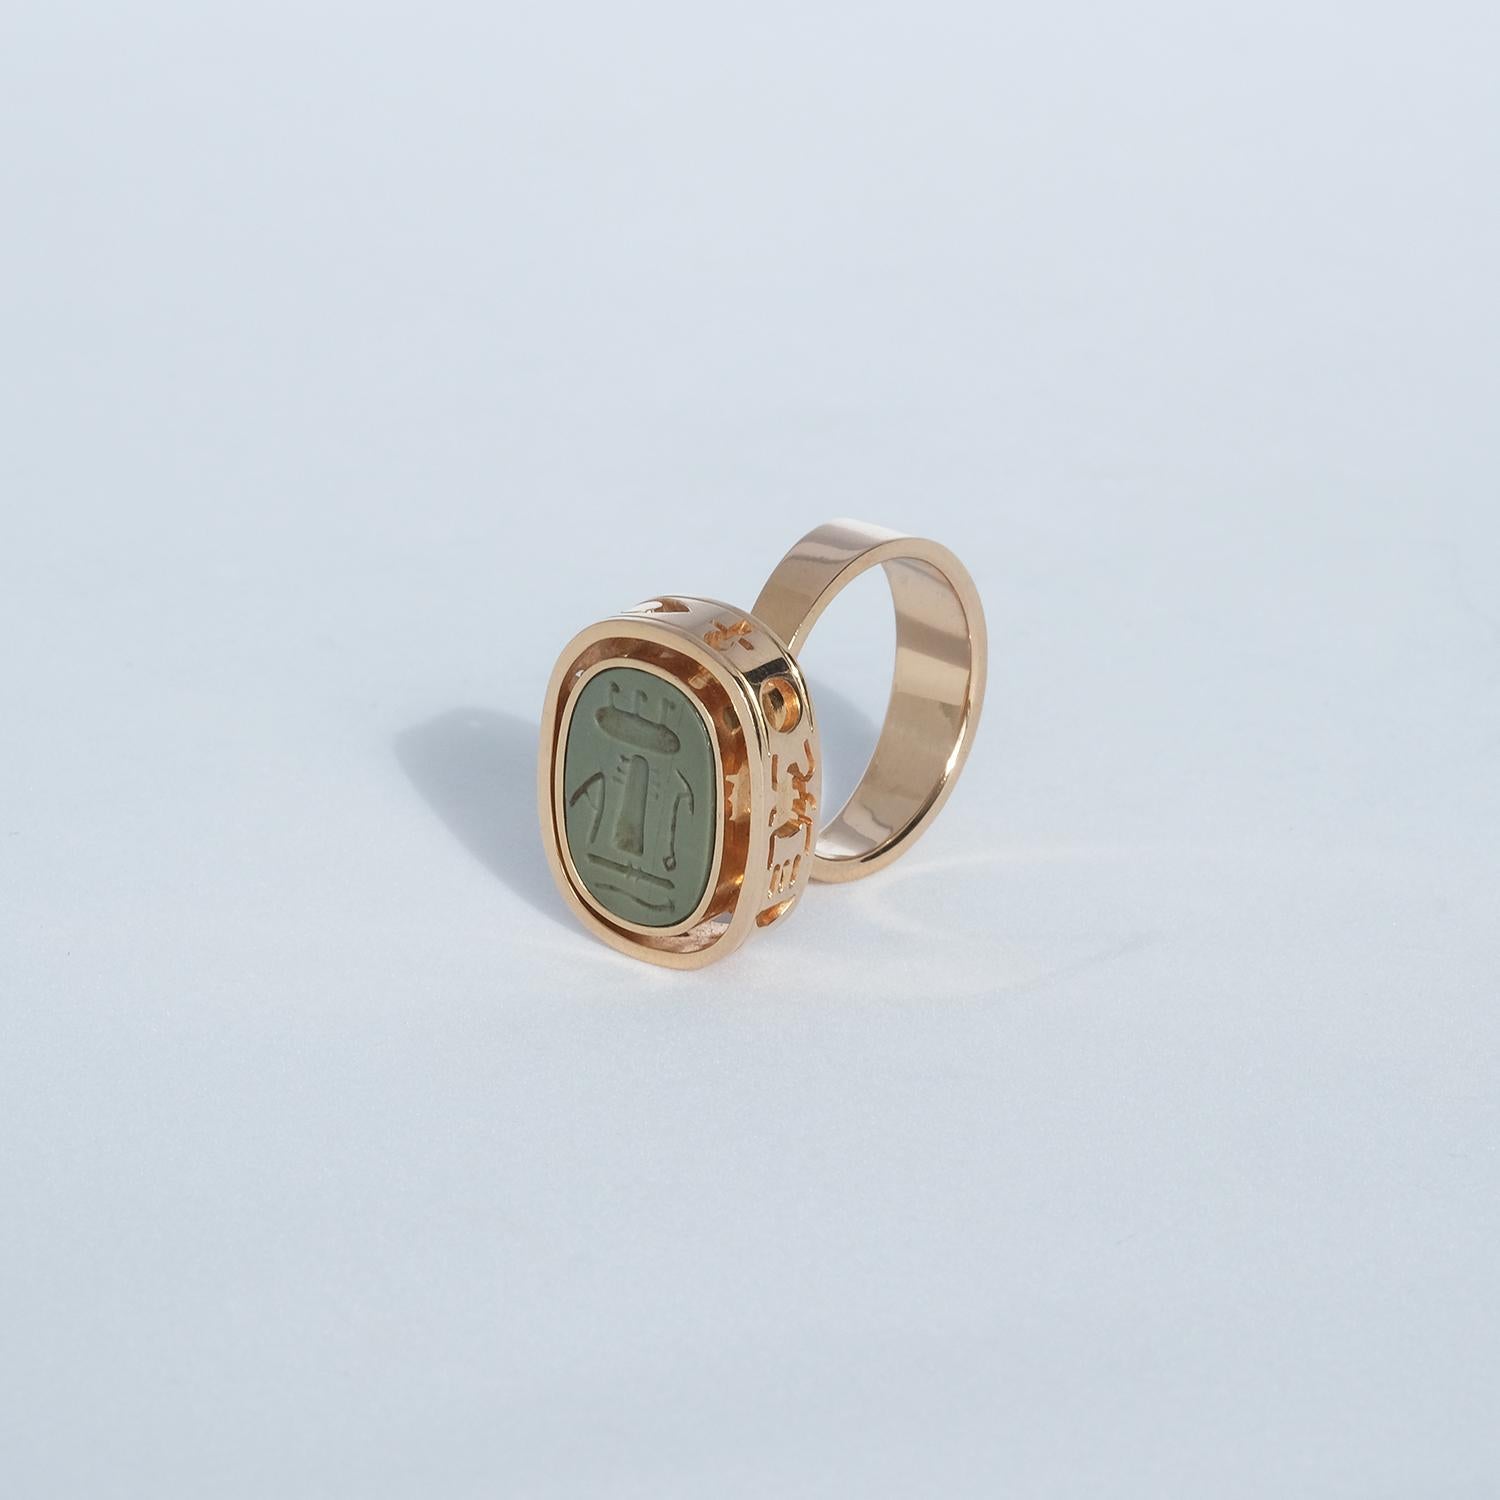 18 K Gold Ring with an Unusual Egyptian Design, Swedish Made 1978 For Sale 2